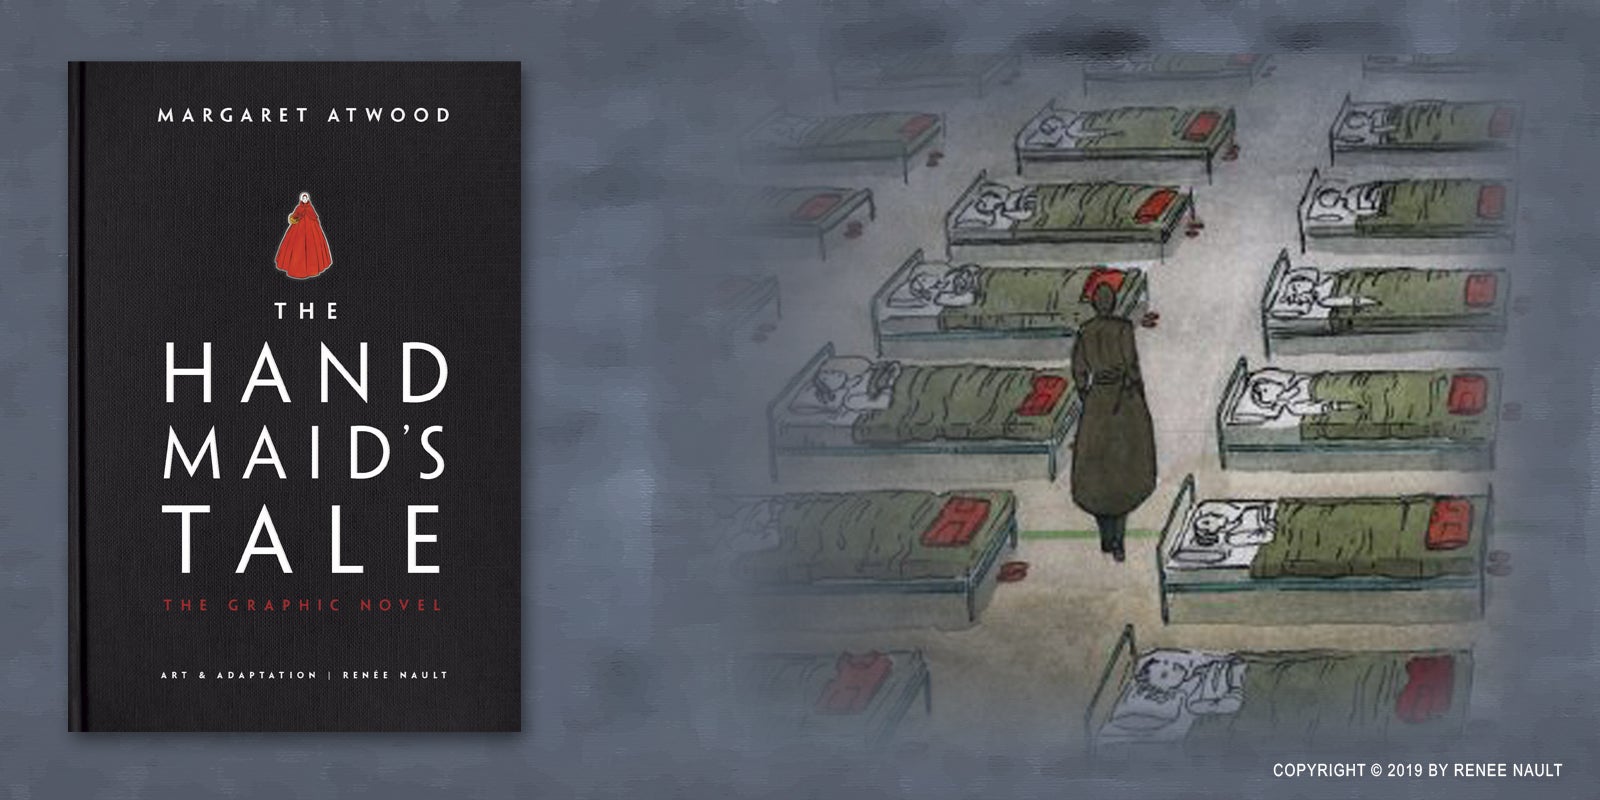 Margaret Atwood’s <i>The Handmaid’s Tale</i> retold through illustrations